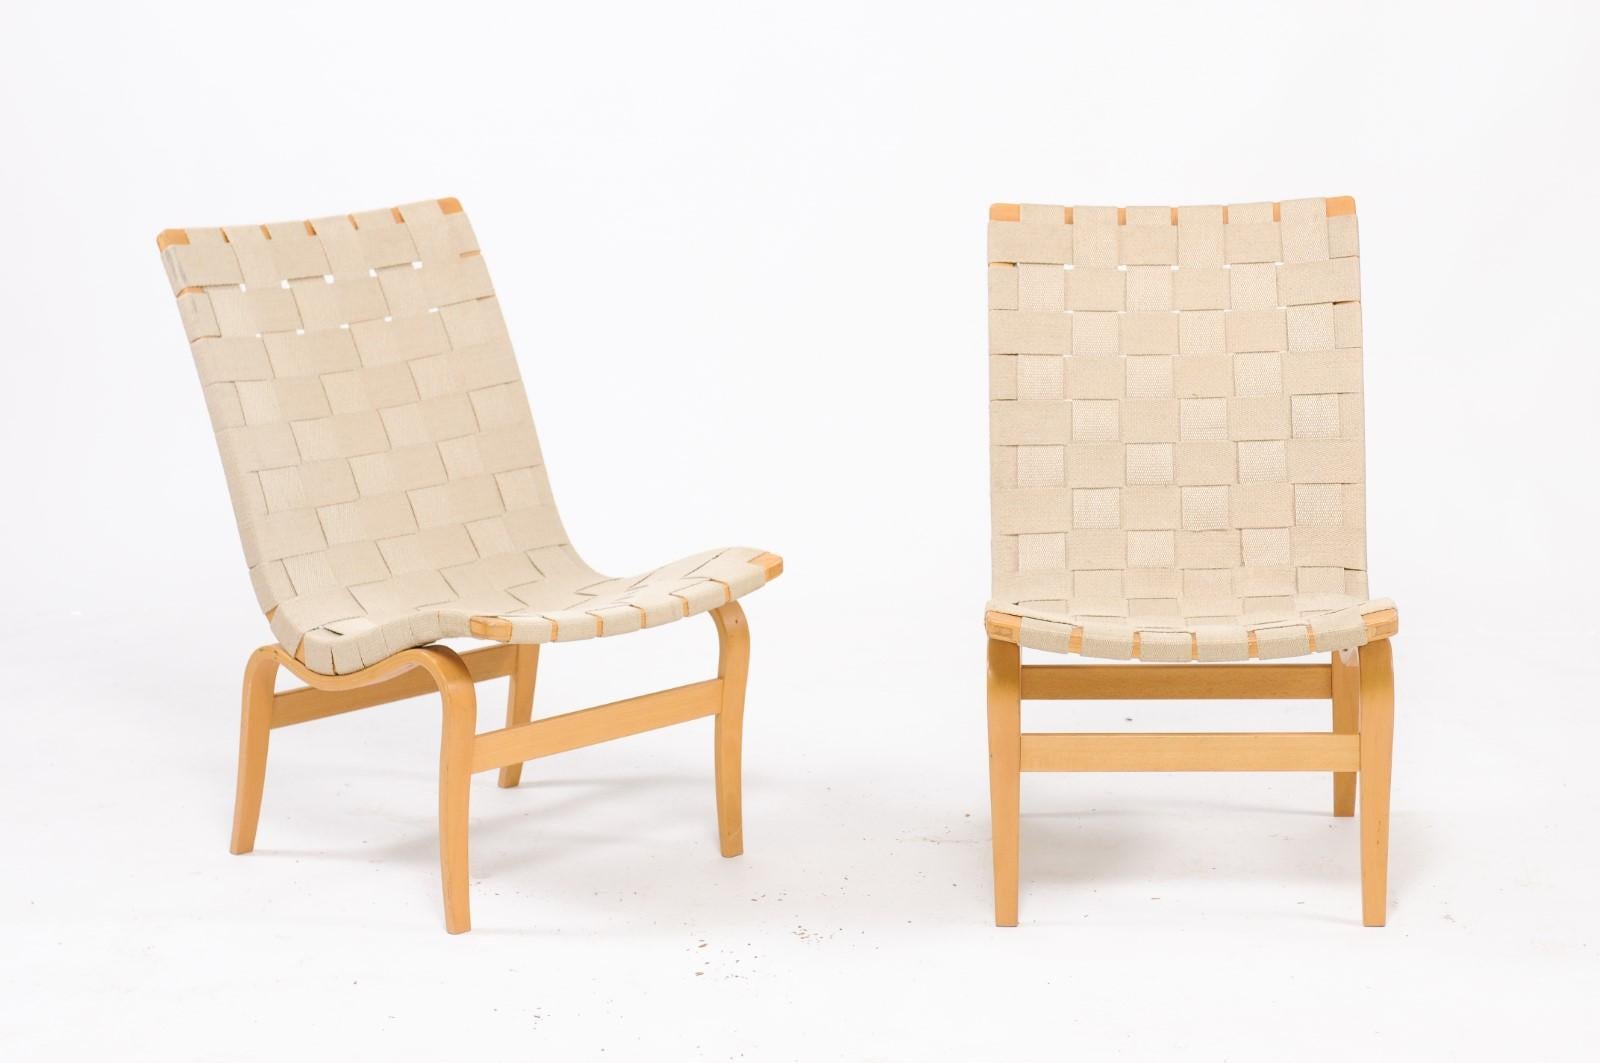 A pair of signed Bruno Mathsson for DUX armless Eva chairs made from bent birch and canvas strapping that will transform a space with Scandinavian Modern charm. 

Signed.